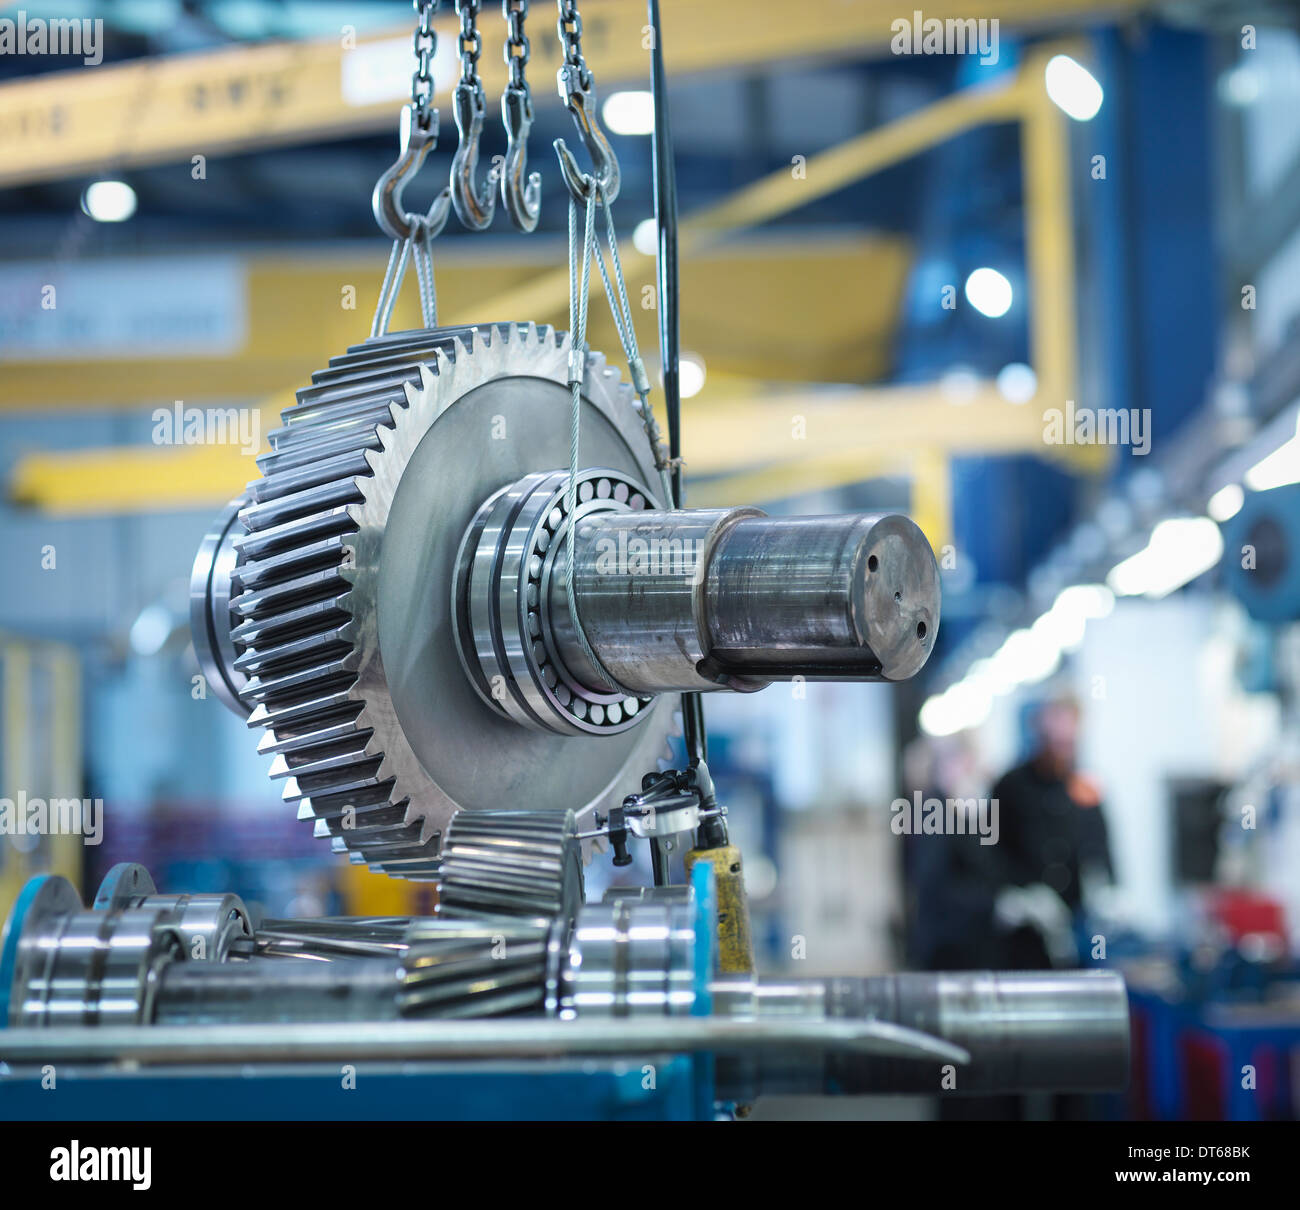 Gear for industrial gearbox in engineering factory Stock Photo